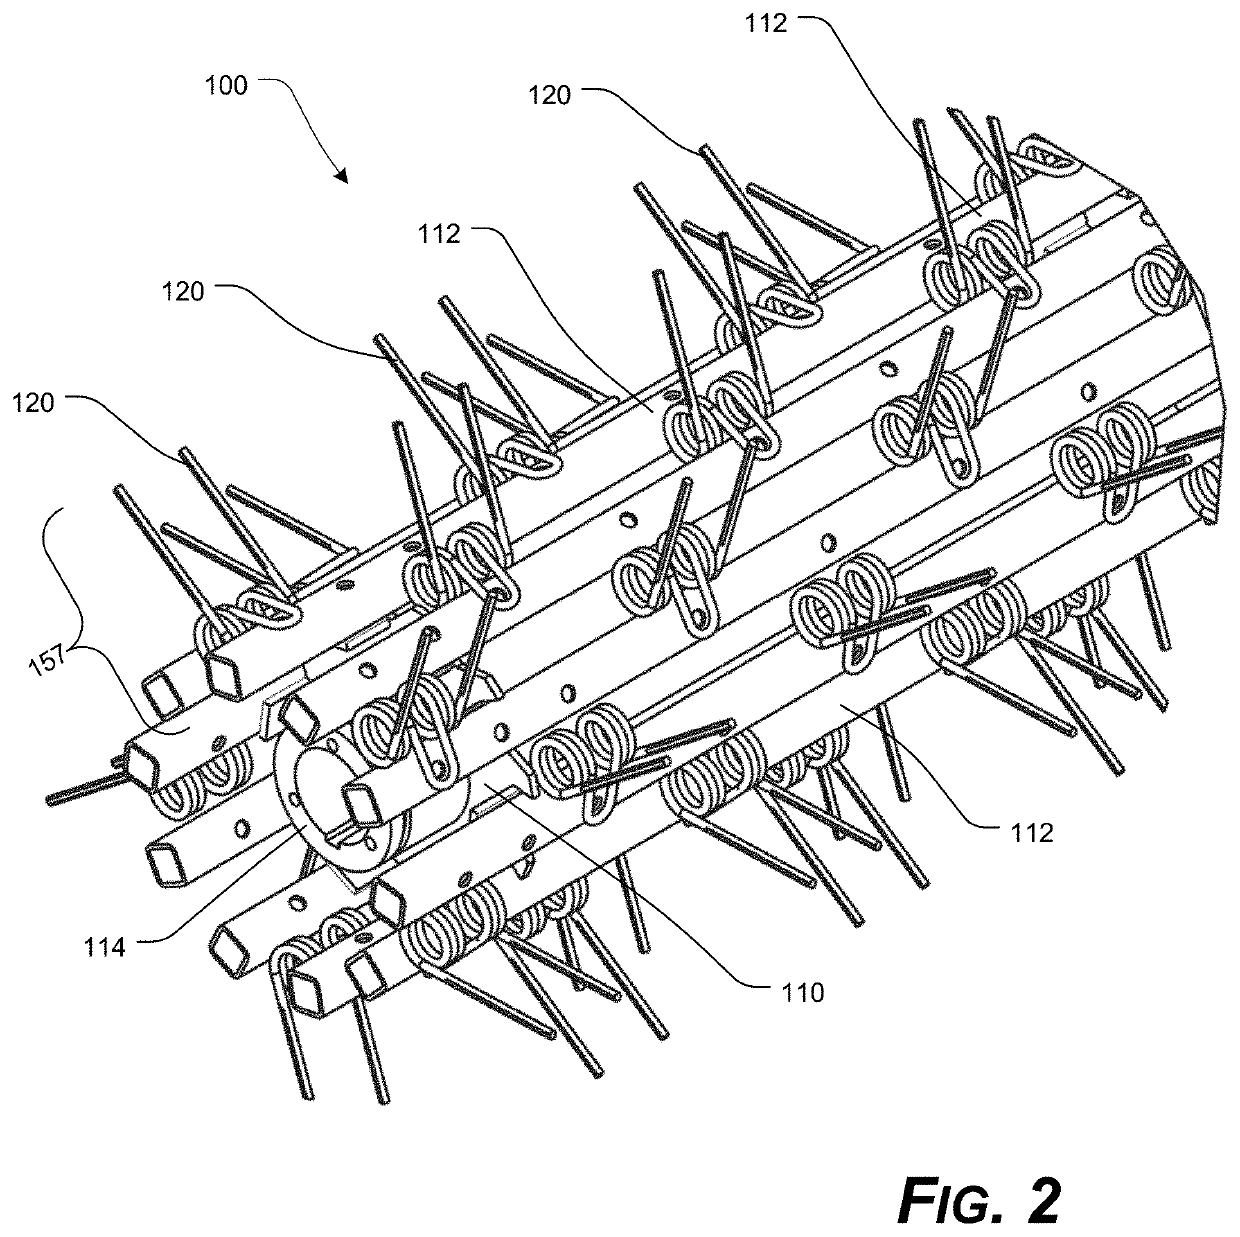 Threshing/Separating Device Having Tined Accelerator and/or Axial Rotor System